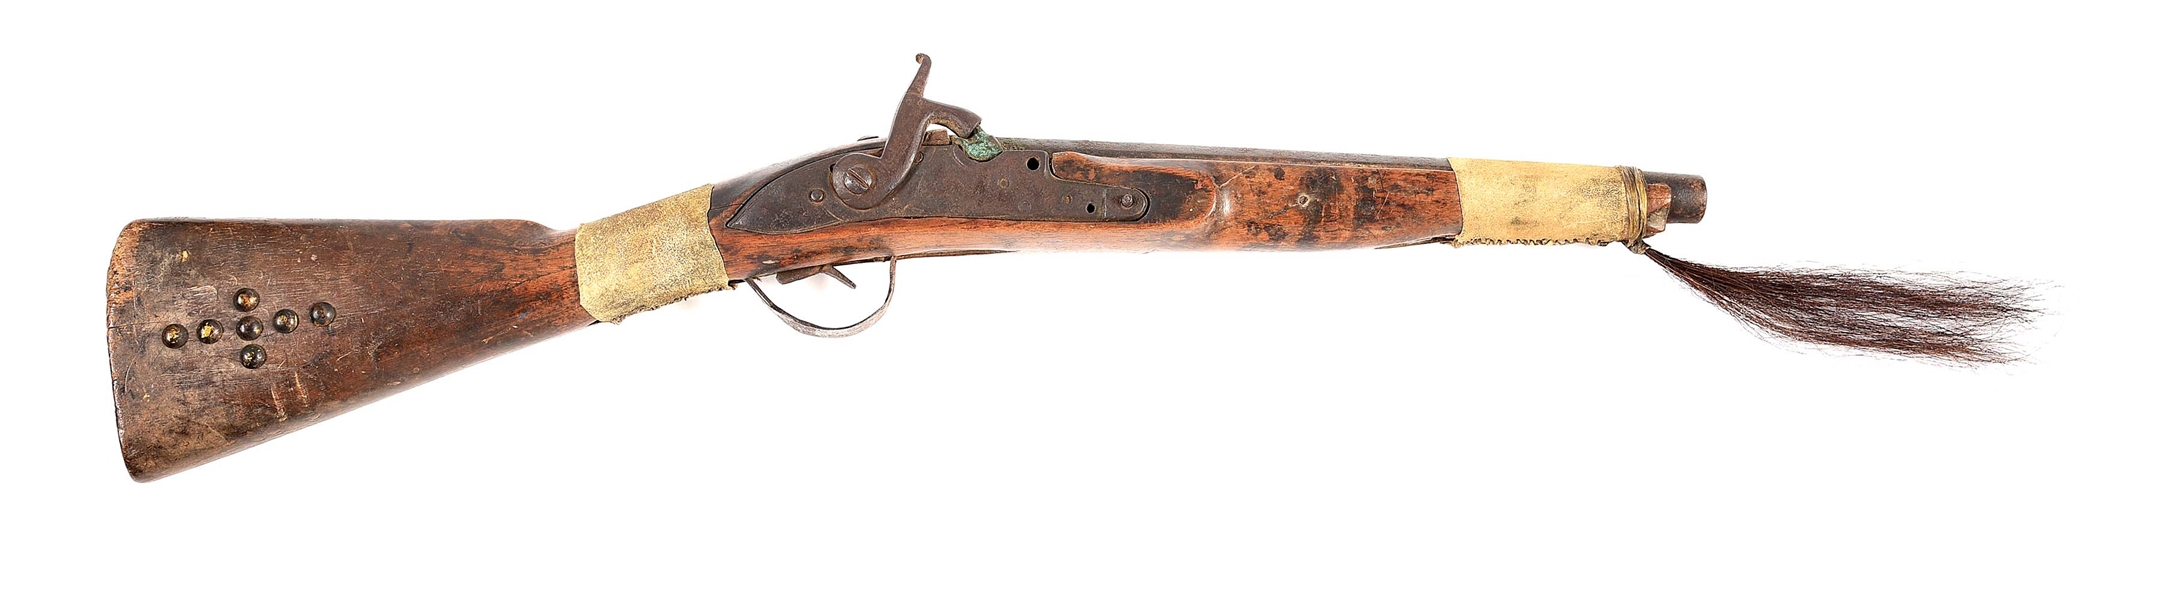 (A) UNTOUCHED AMERICAN PLAINS INDIAN TRADE TYPE BLANKET GUN.